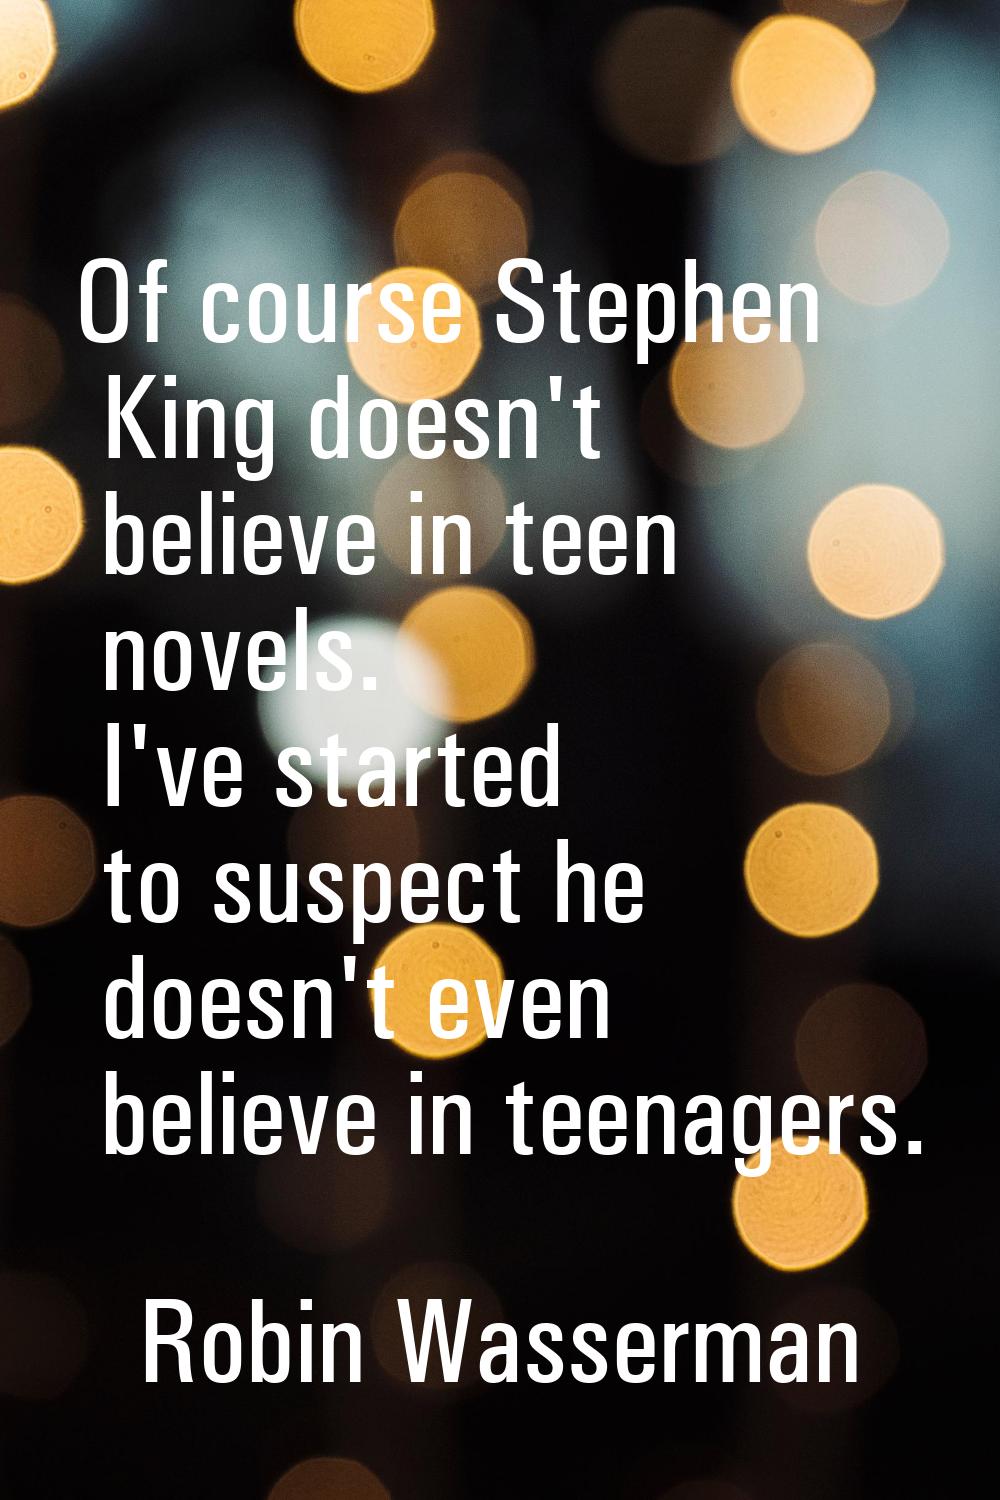 Of course Stephen King doesn't believe in teen novels. I've started to suspect he doesn't even beli